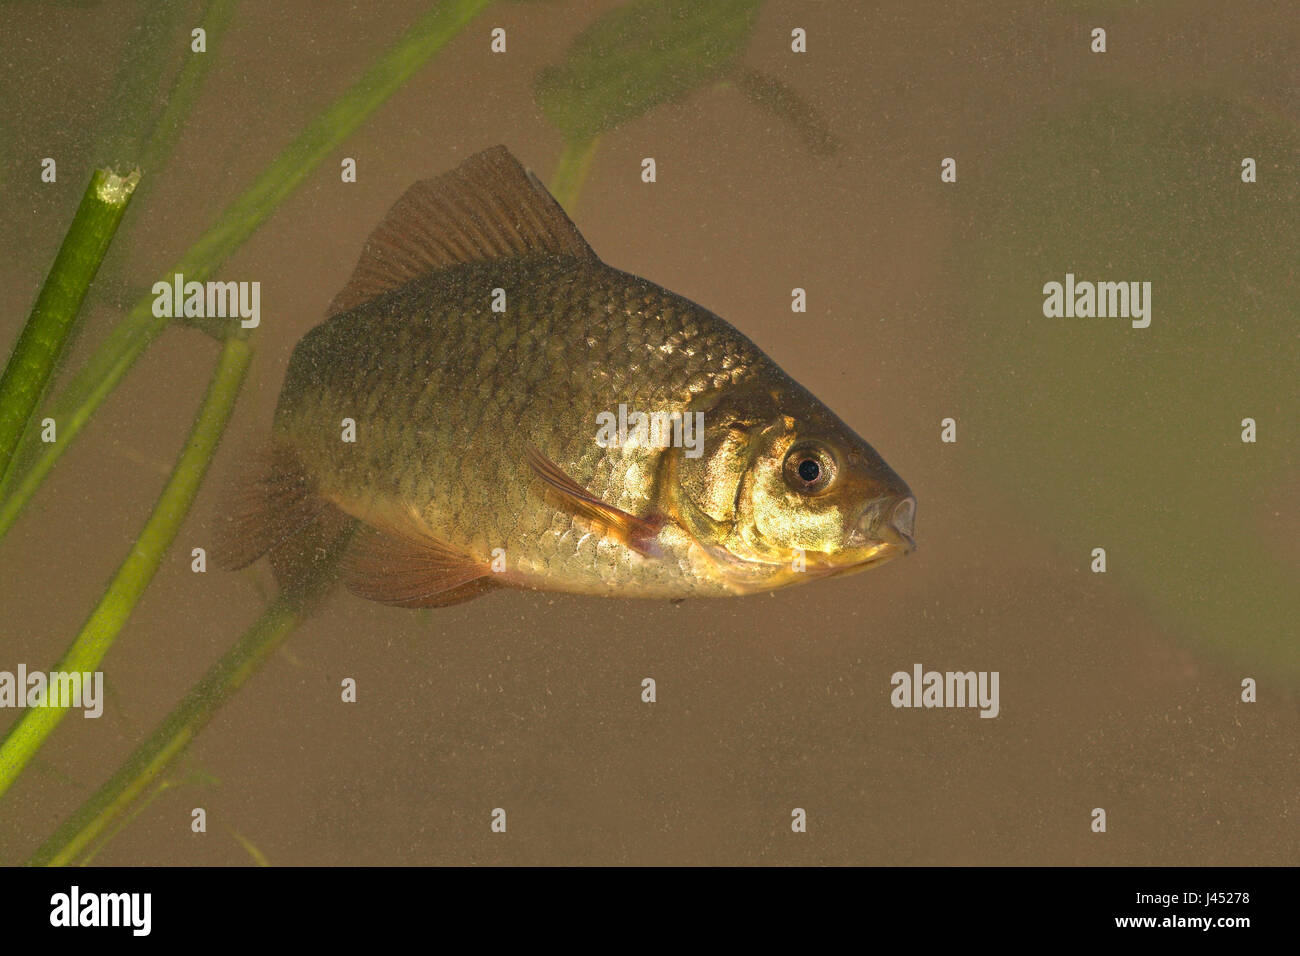 photo of a Crucian carp swimming between the vegetation against a brown background Stock Photo